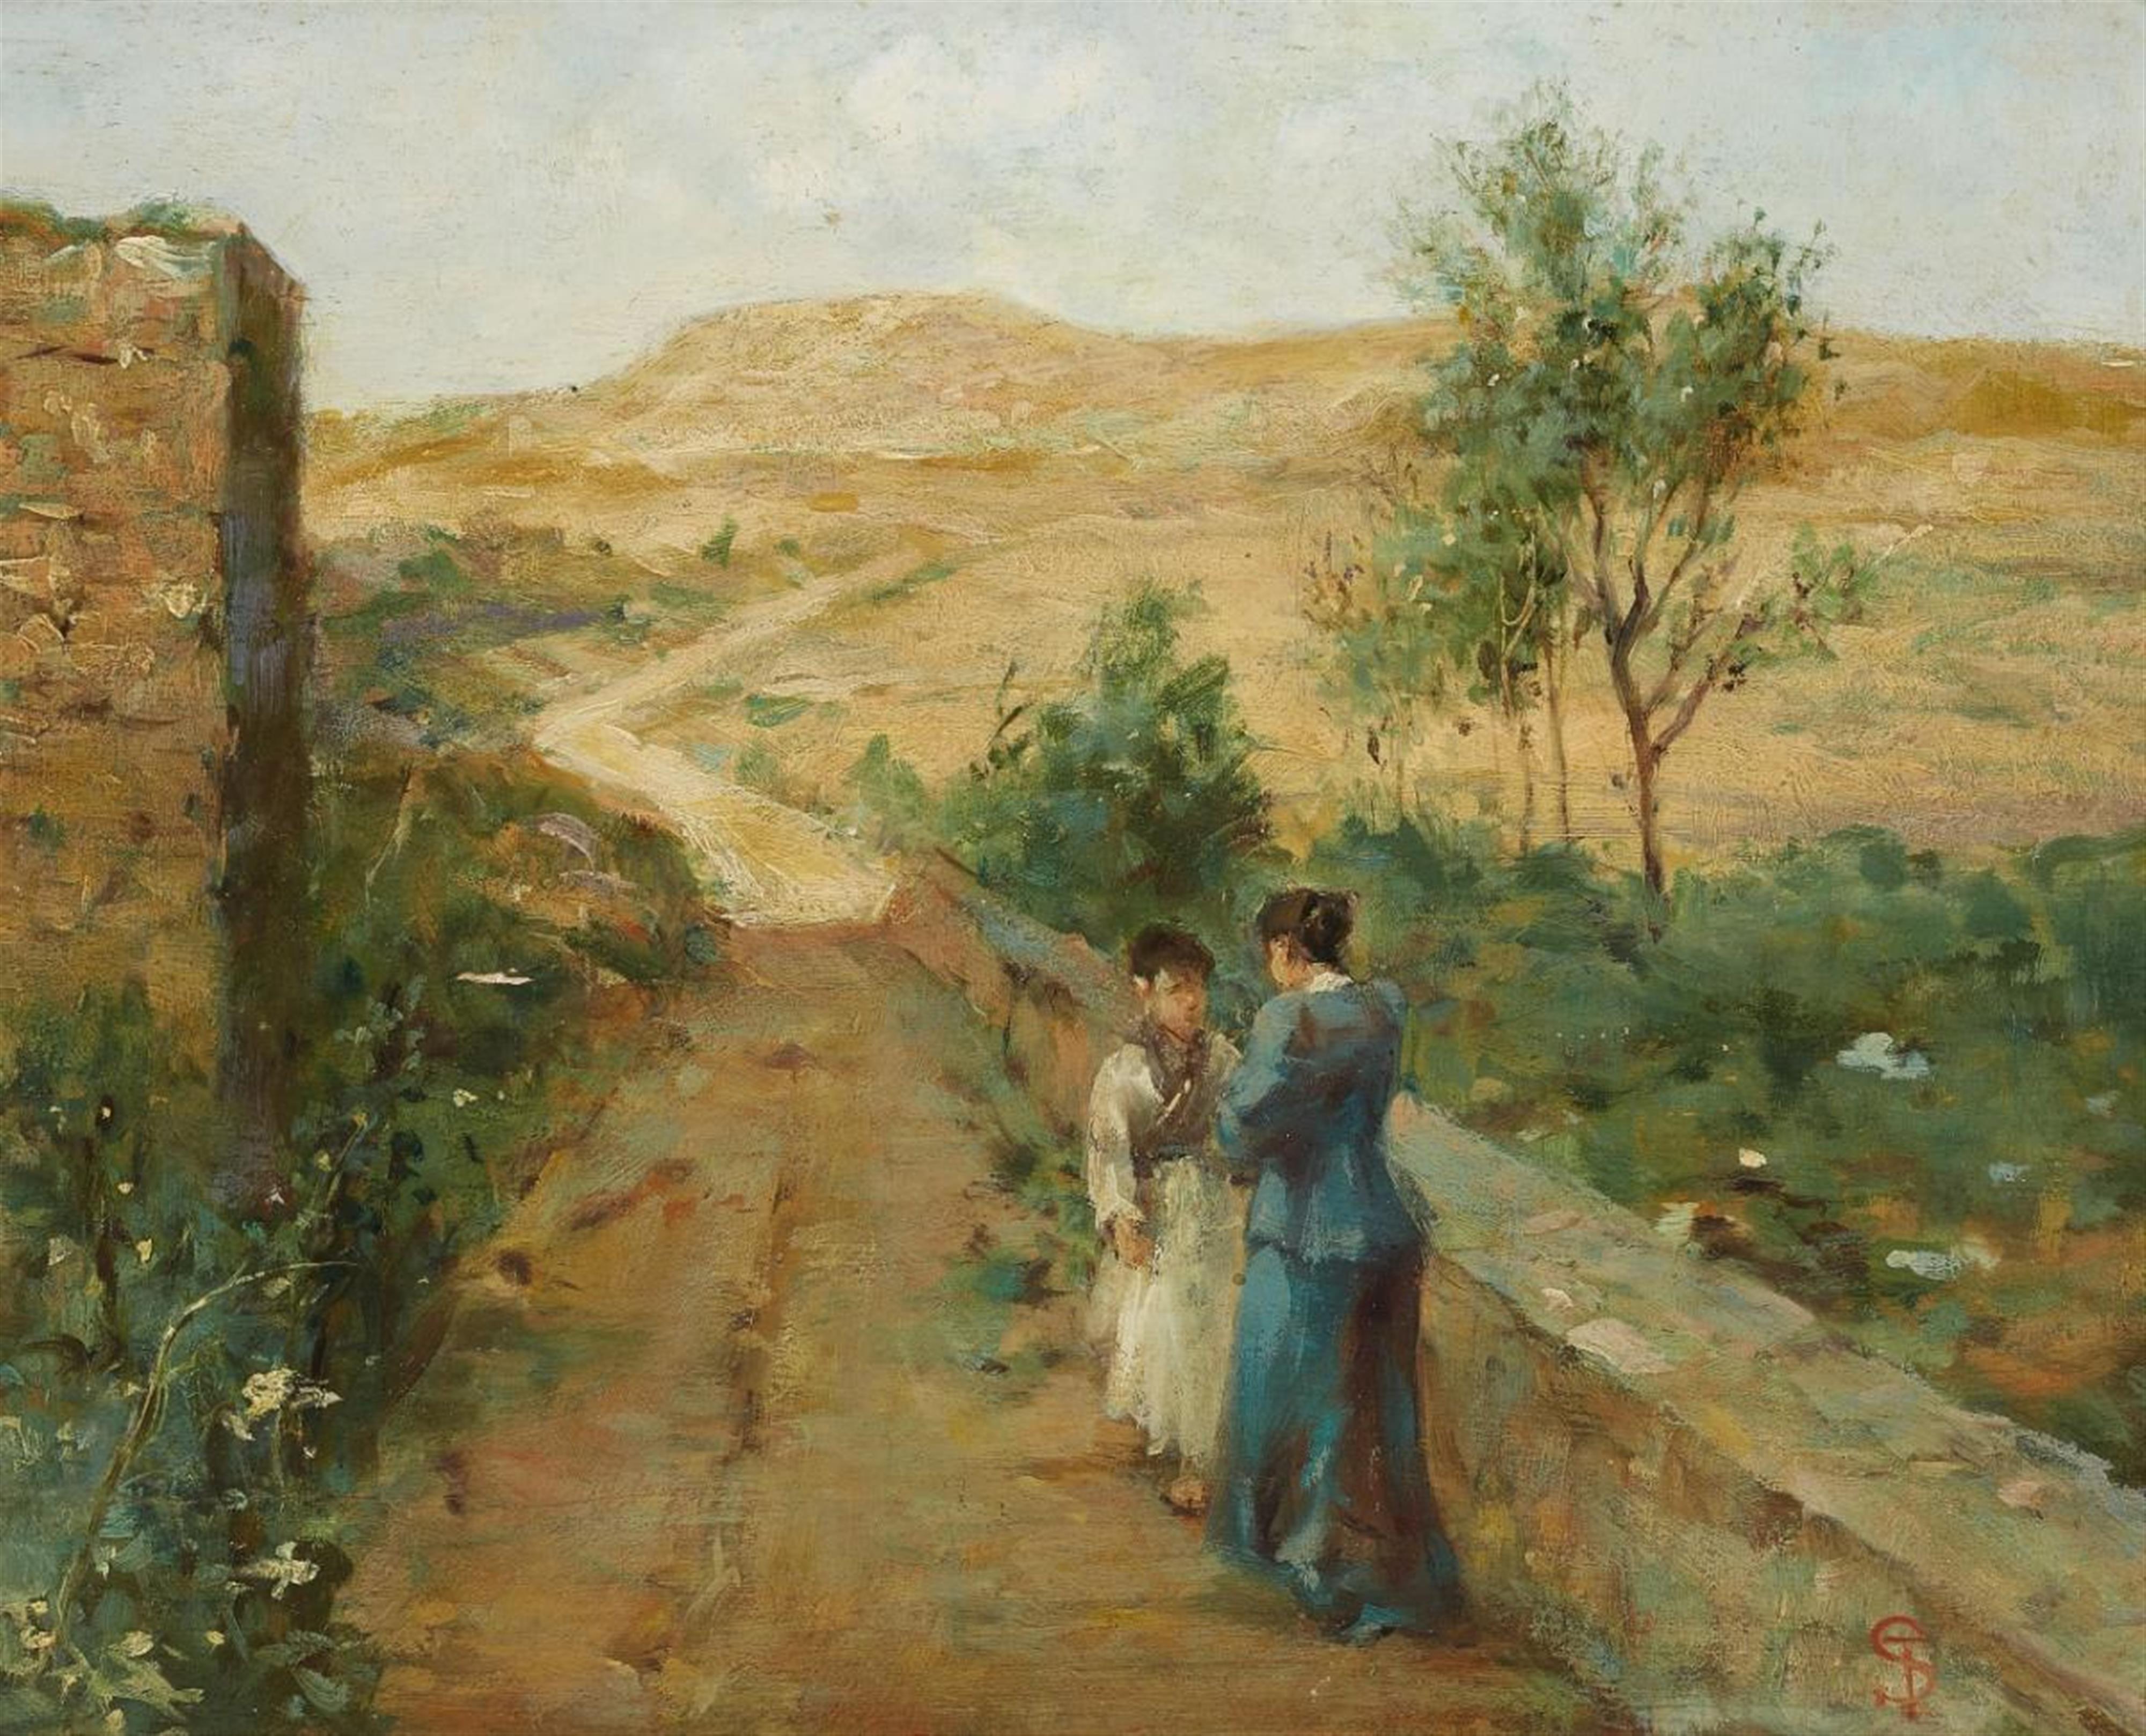 Telemaco Signorini - CONVERSATION ON A COUNTRY ROAD - image-1